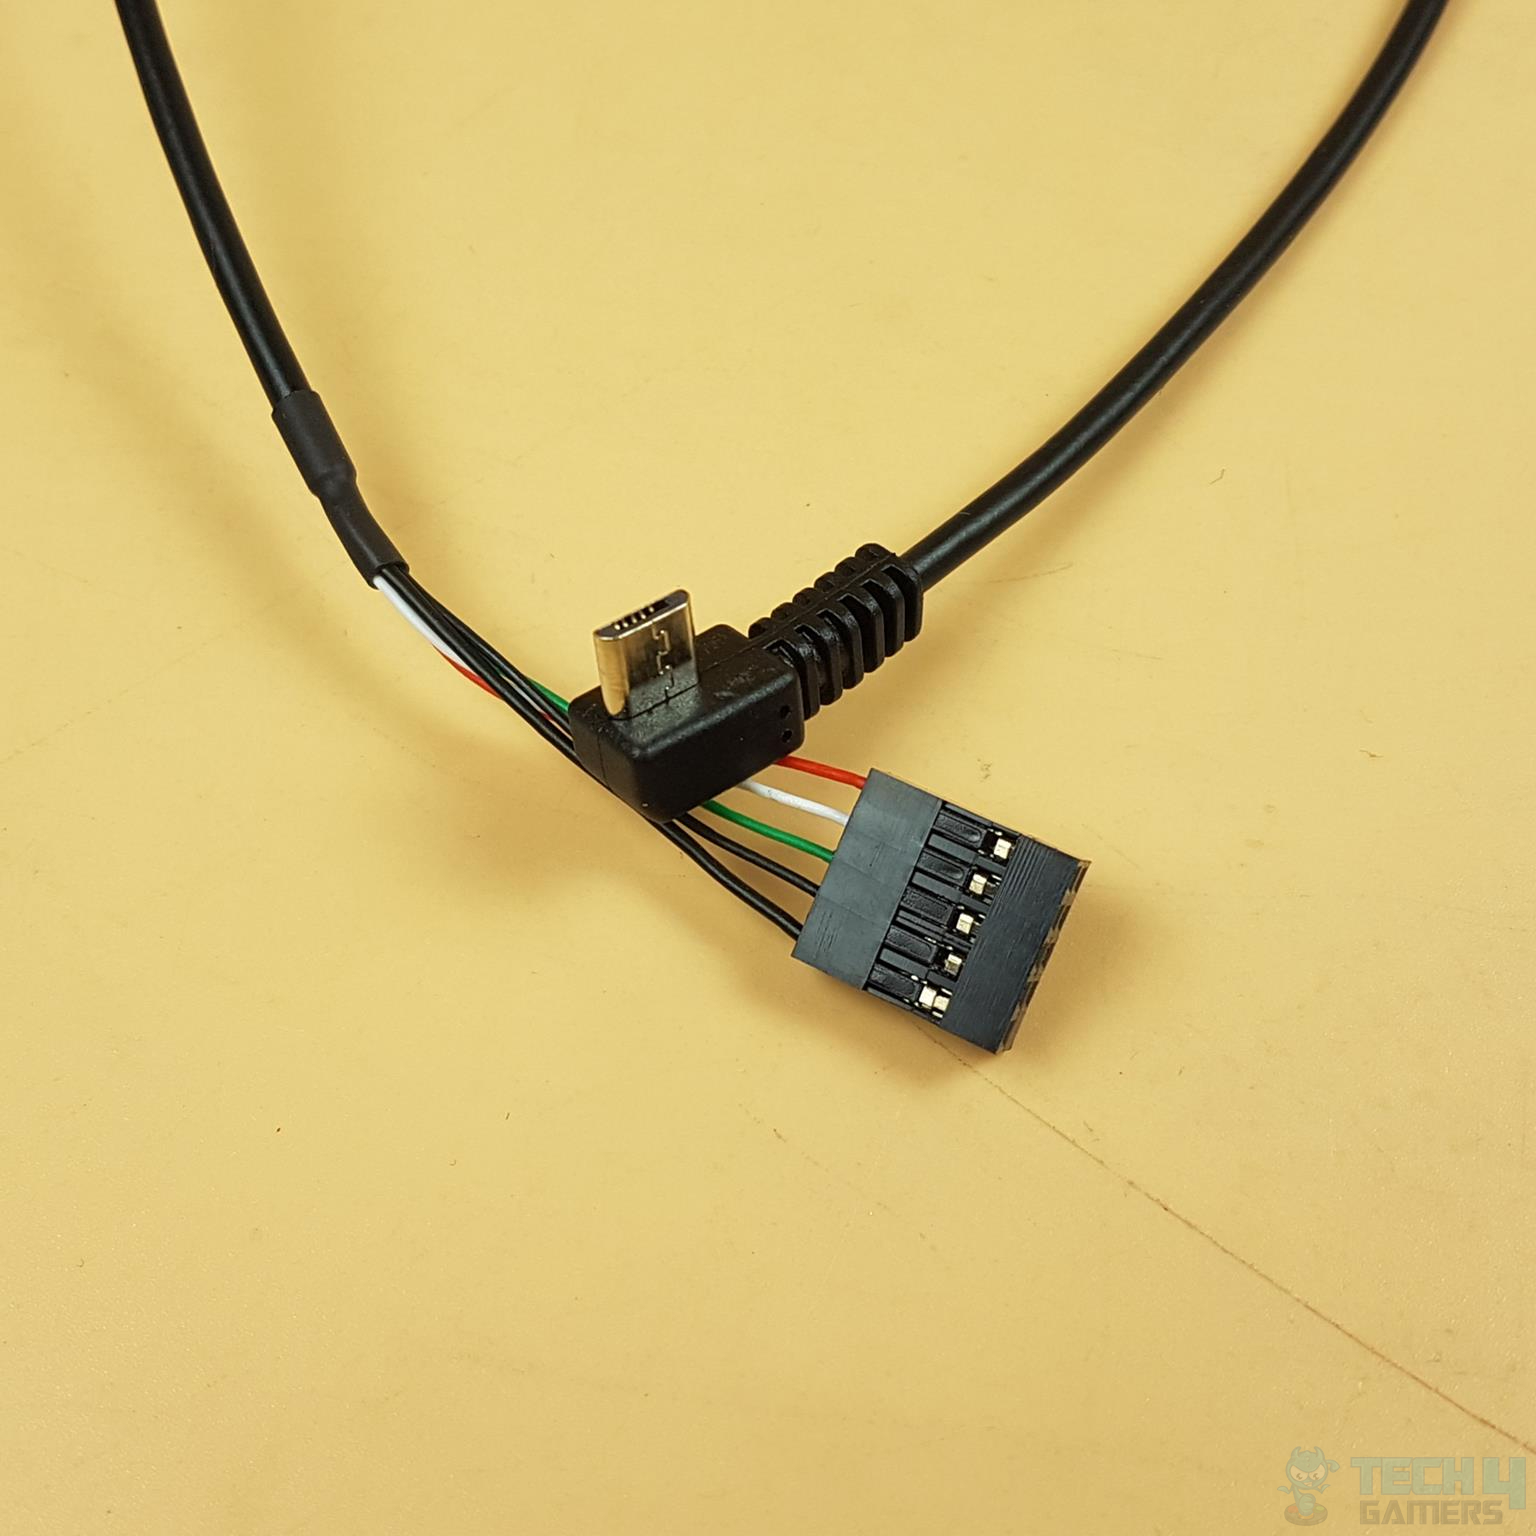 AORUS WATERFORCE X 280 Closer look at the Micro-USB cable